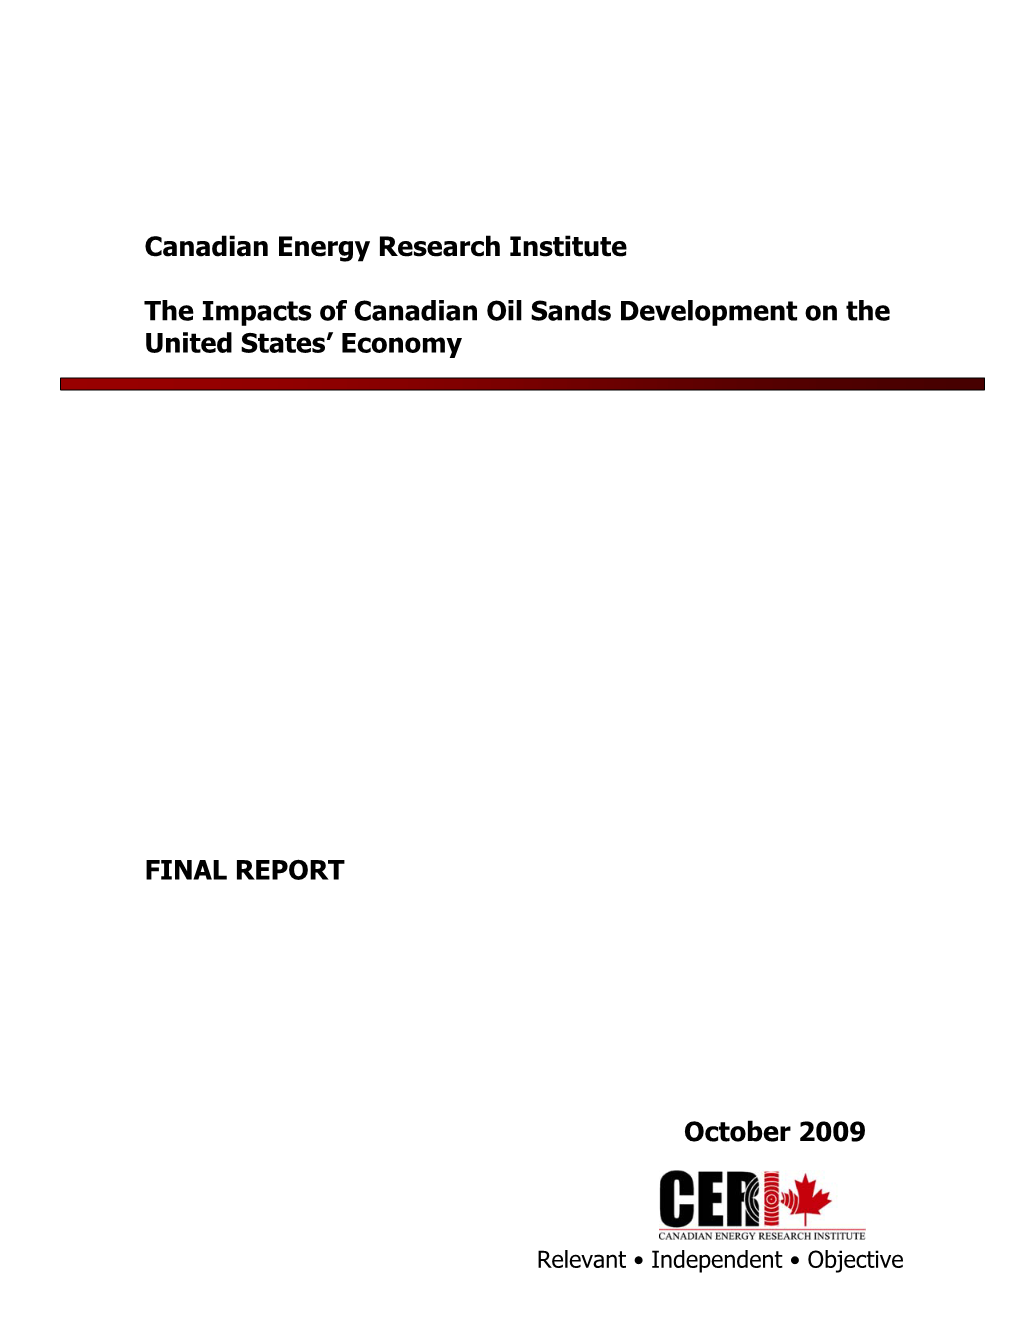 The Impacts of Canadian Oil Sands Development on the United States’ Economy